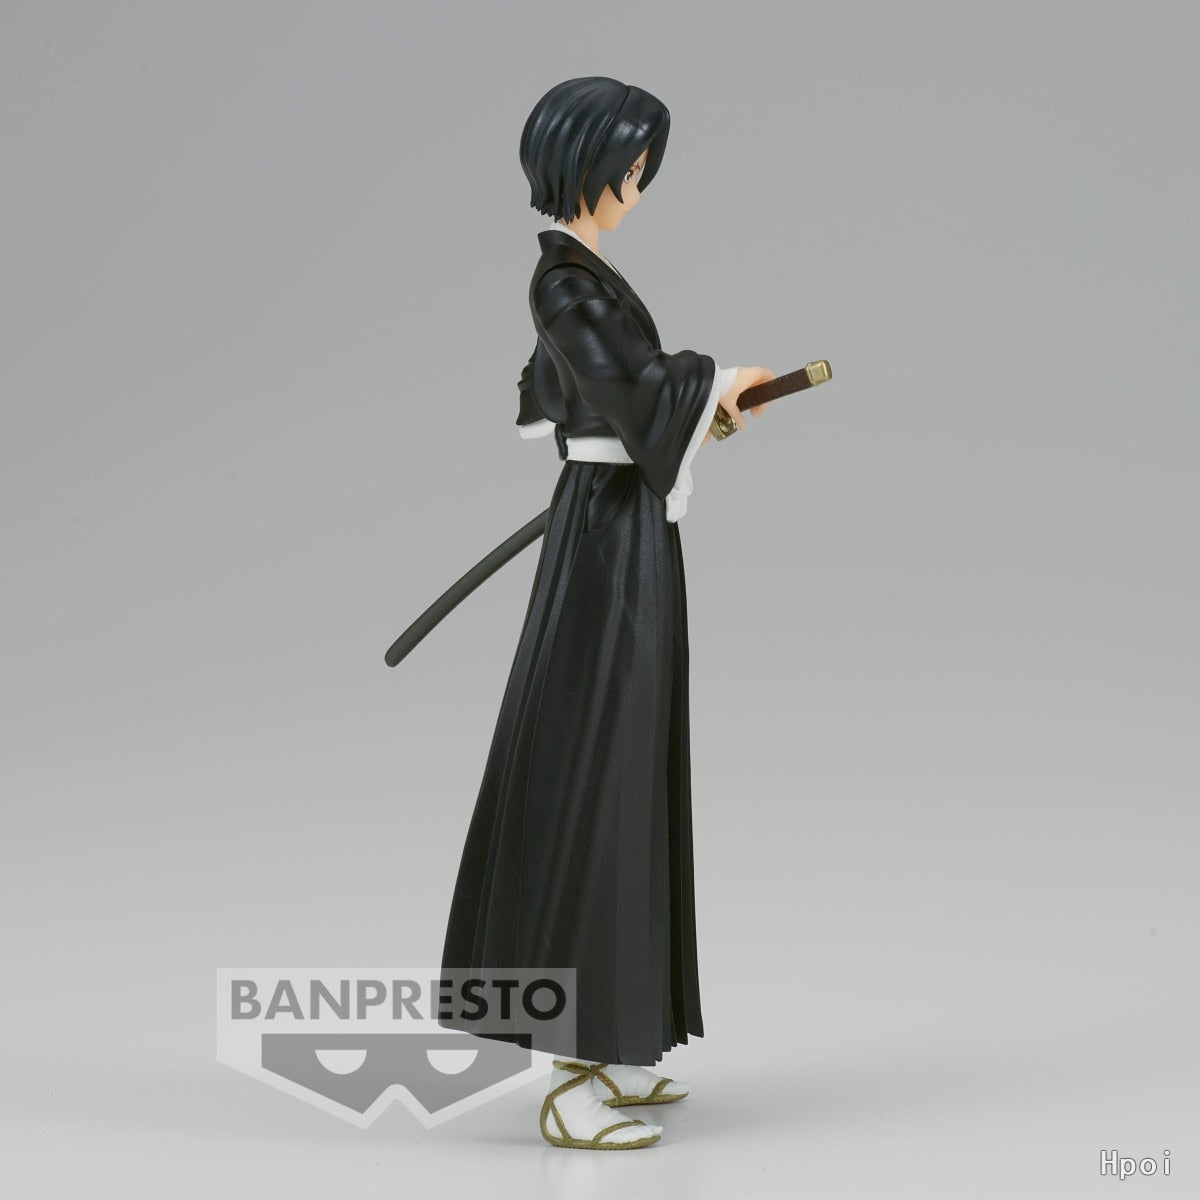 This model is a tribute to Rukia's stoic beauty & the enduring spirit. | If you are looking for more Bleach Merch, We have it all! | Check out all our Anime Merch now!